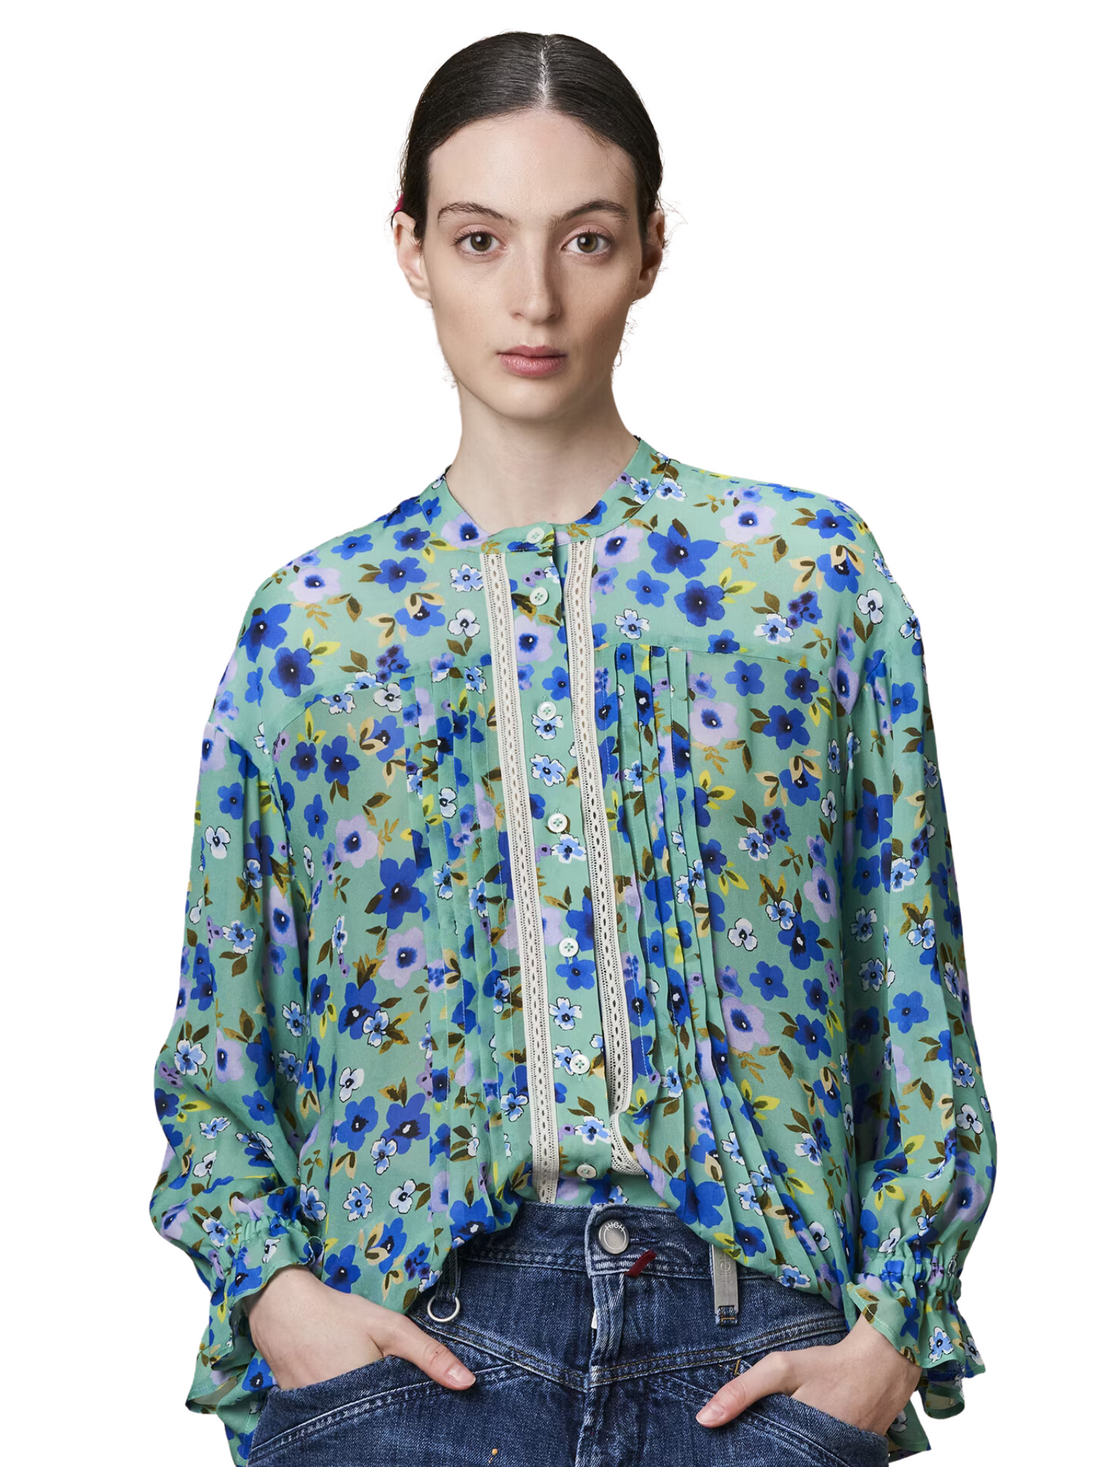 Shop the Gladden Print Shirt from High Couture at Jessimara.com